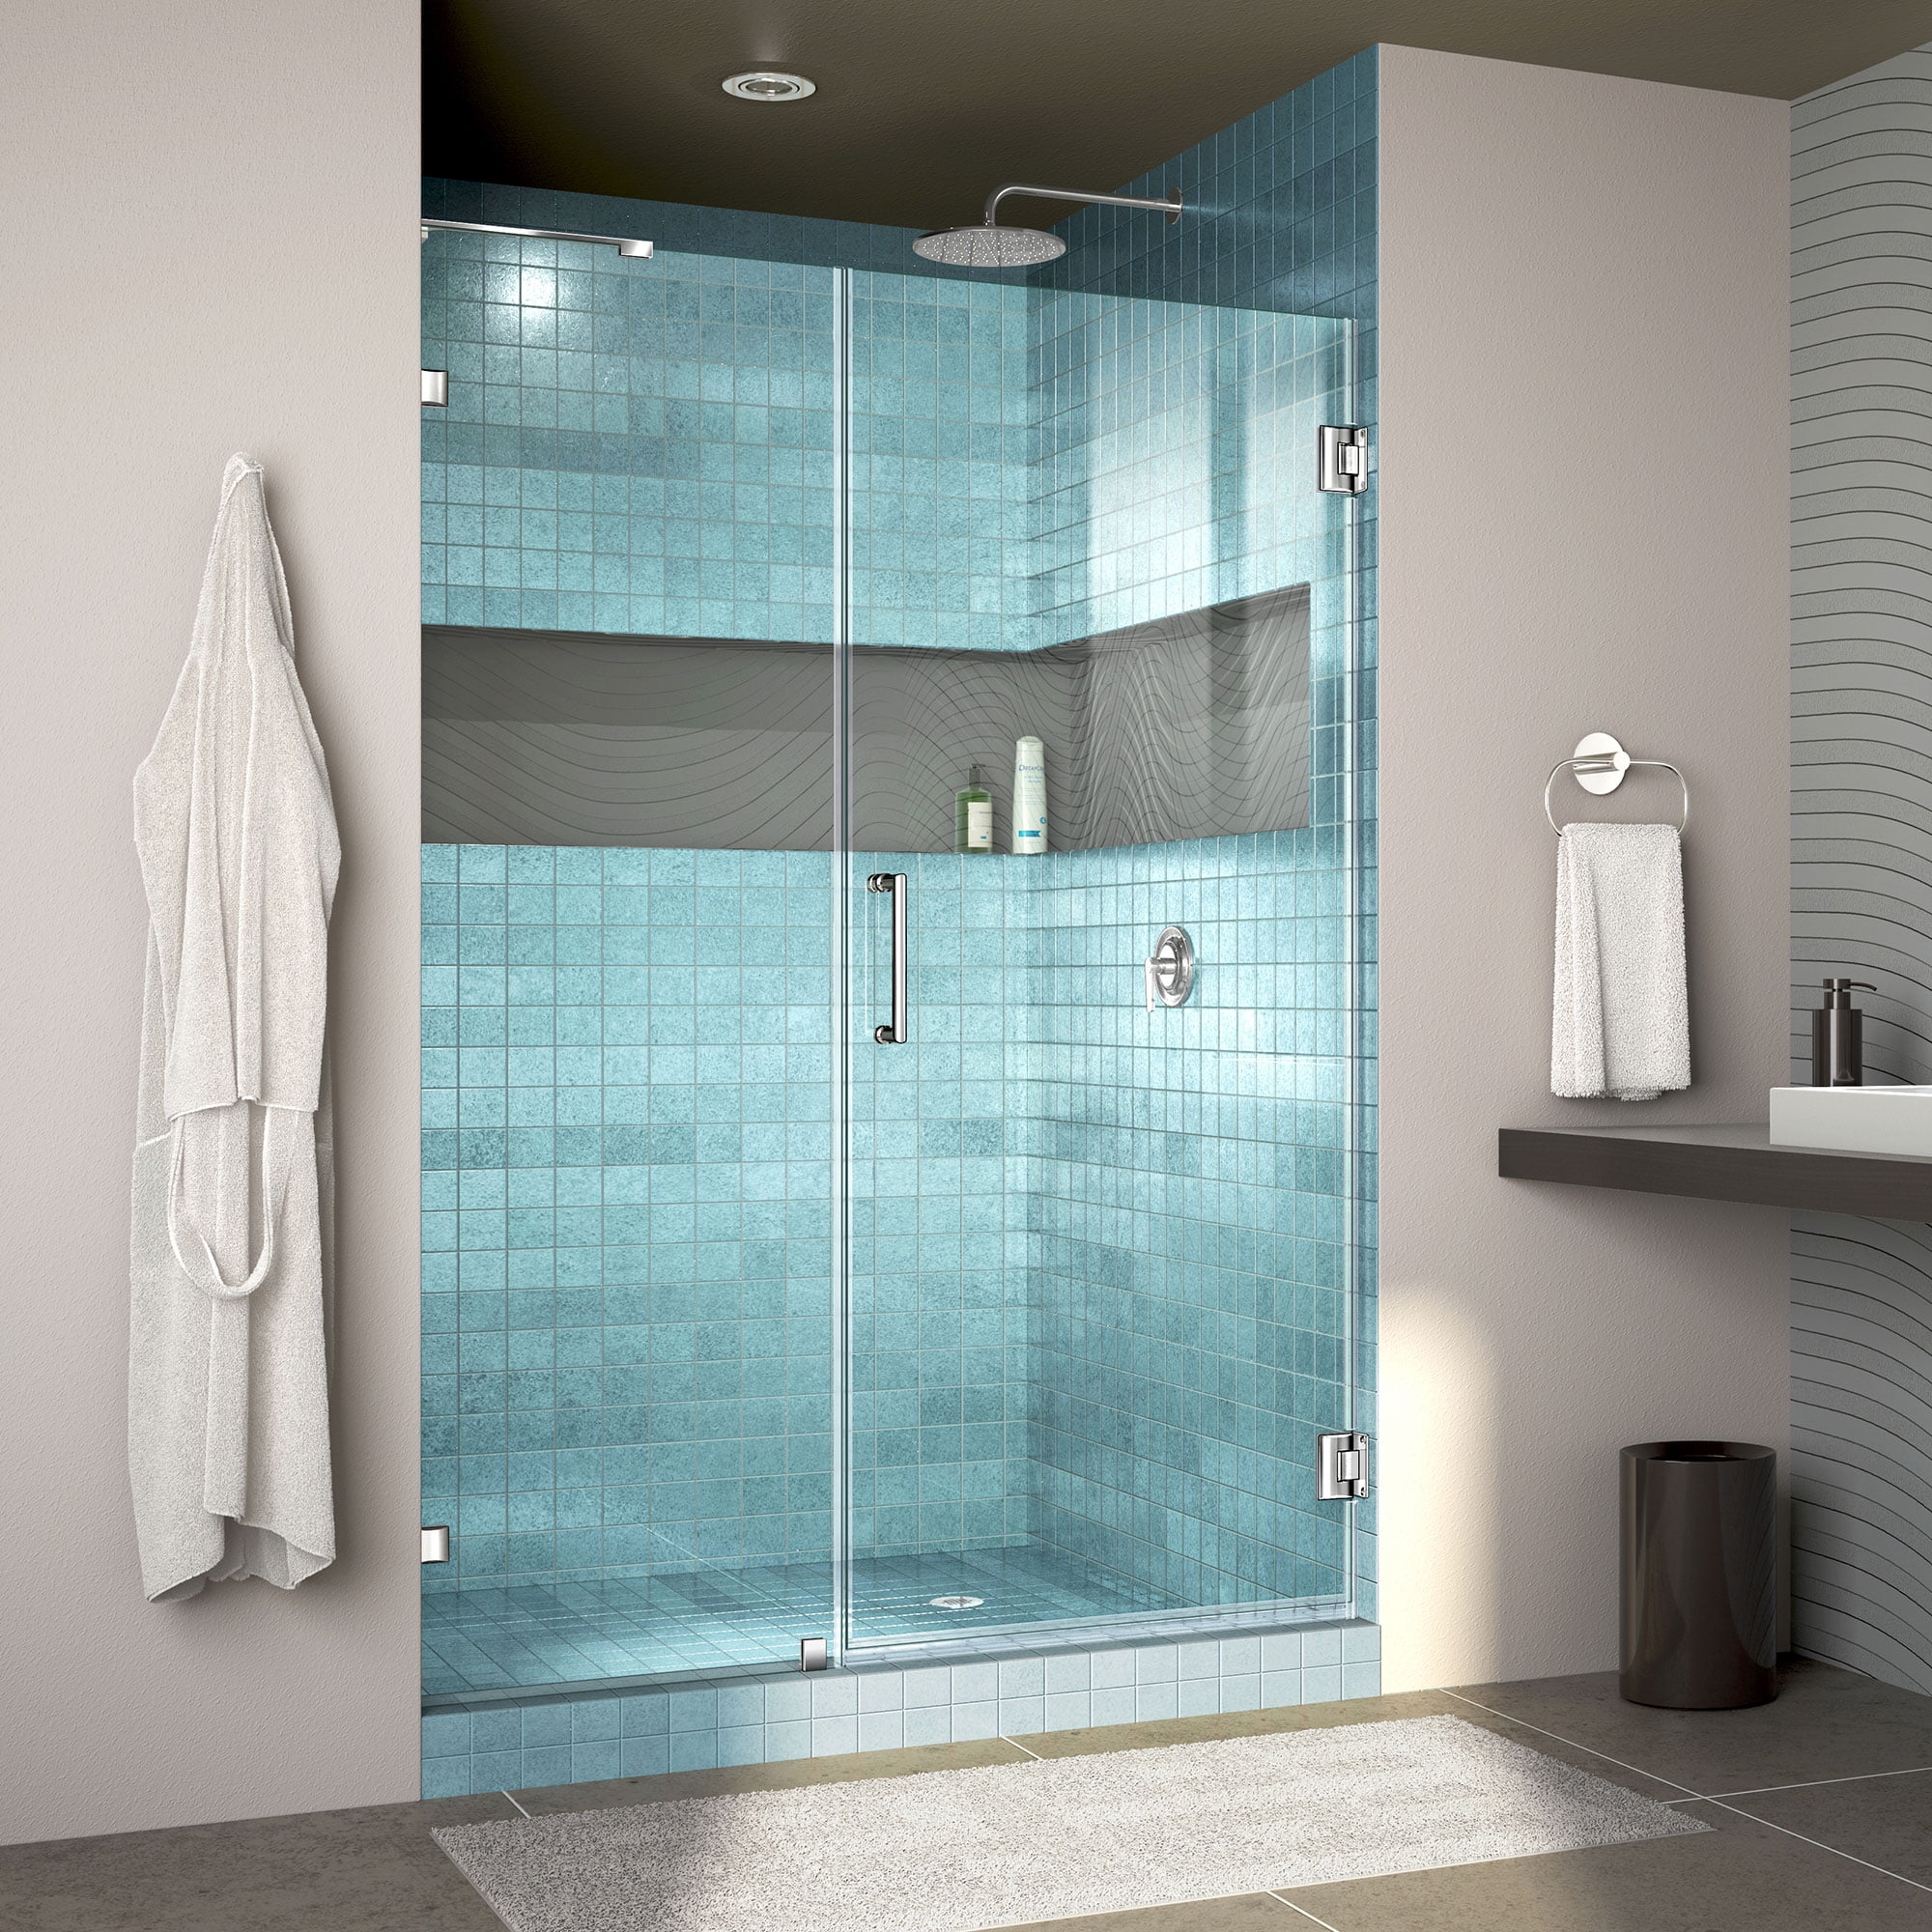 DreamLine Unidoor Lux 52 in. W x 72 in. H Fully Frameless Hinged Shower Door with L-Bar in Chrome